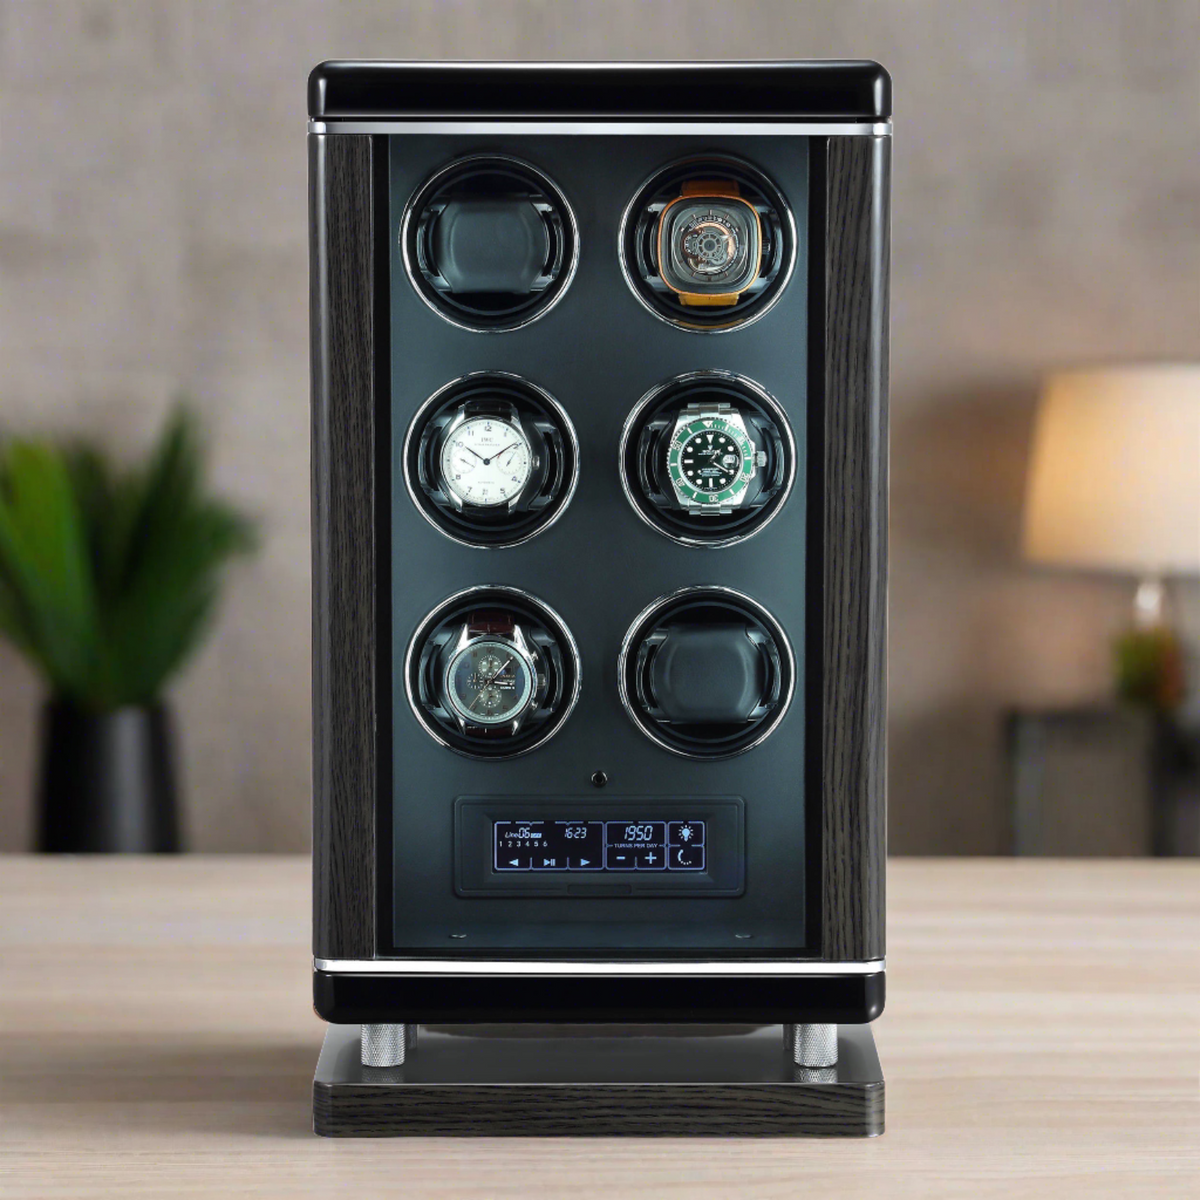 6 Watch Winder for Automatic Watches with BioMetric Technology by Tempus